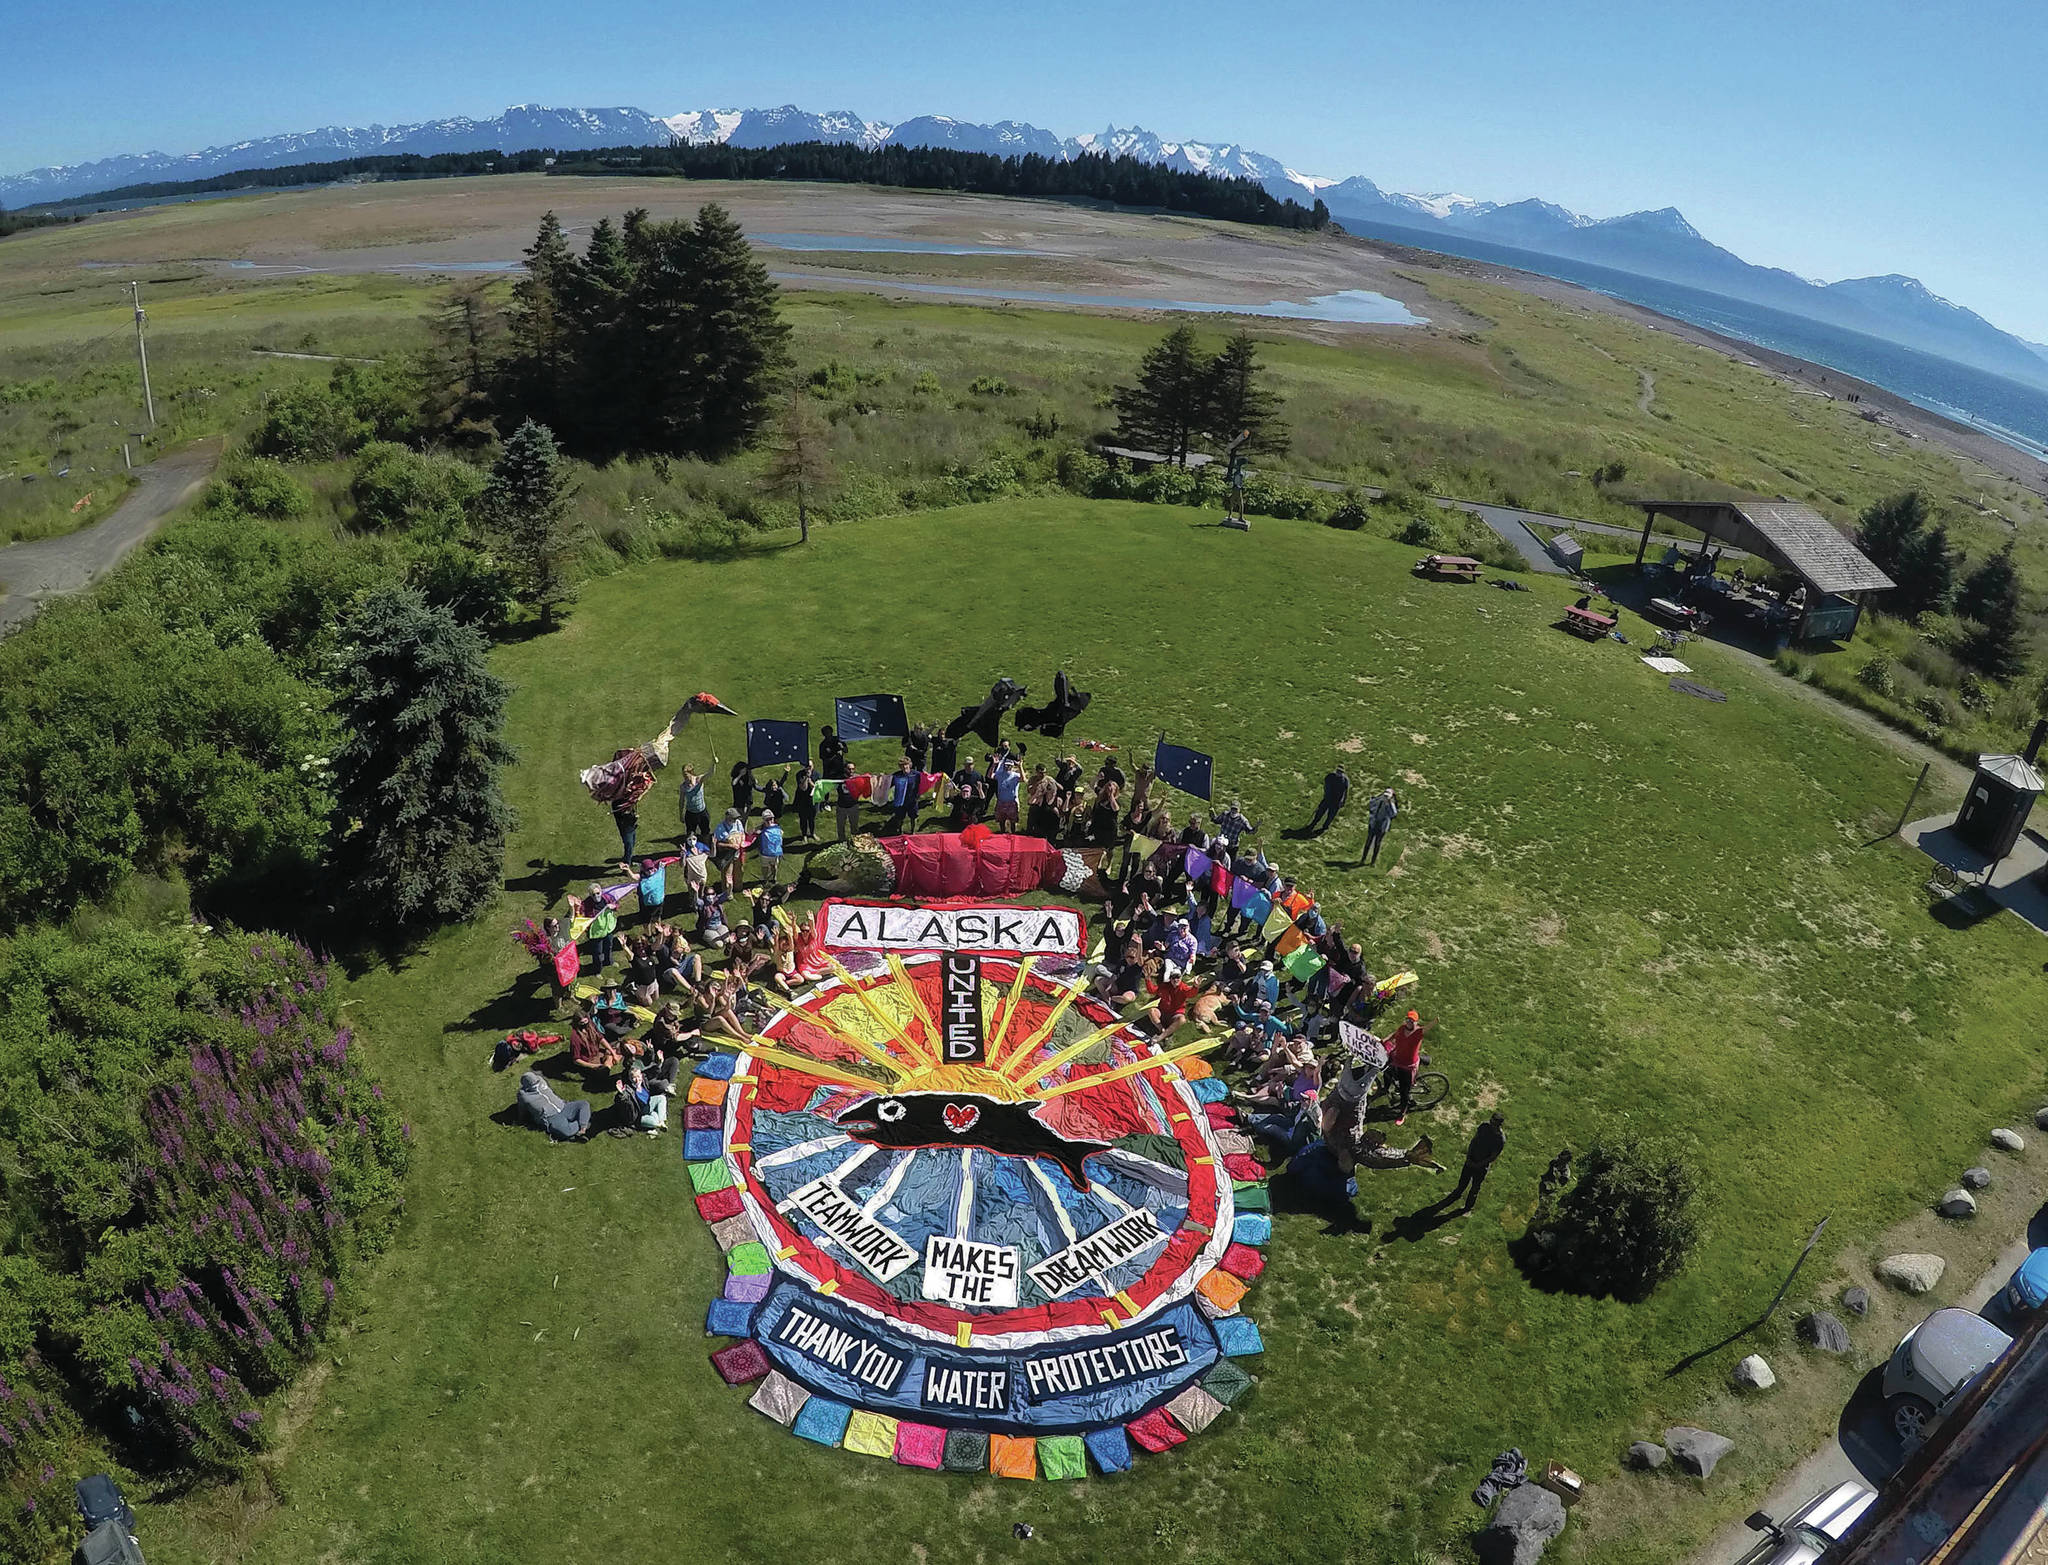 Homer’s Bishop’s Beach Park was the location for an enactment of public participatory art on Sunday, Aug. 1, 2021, in Homer, Alaska. A ground design of colored fabric was created to convey a message of “Alaska United,” “Teamwork Makes the Dream Work” and “Thank You Water Protectors.” The public was invited to be part of the art by standing and sitting around the central design. Salmon sculptures, raven and sandhill crane puppets, Alaska flags and colored bandanas were an added touch to the overhead image depicting salmon solidarity. The project was led by Mavis Muller and was the finale to her series of 12 annual aerial group photos for the protection of Alaska’s Bristol Bay. Photographer Russell Campbell captured the photo from a bucket lift at 35 feet high. “Art is communication. With our creativity and imagination we can inspire new possibilities, and we can have fun doing it,” Muller said. (Photograph by Russell Campbell)